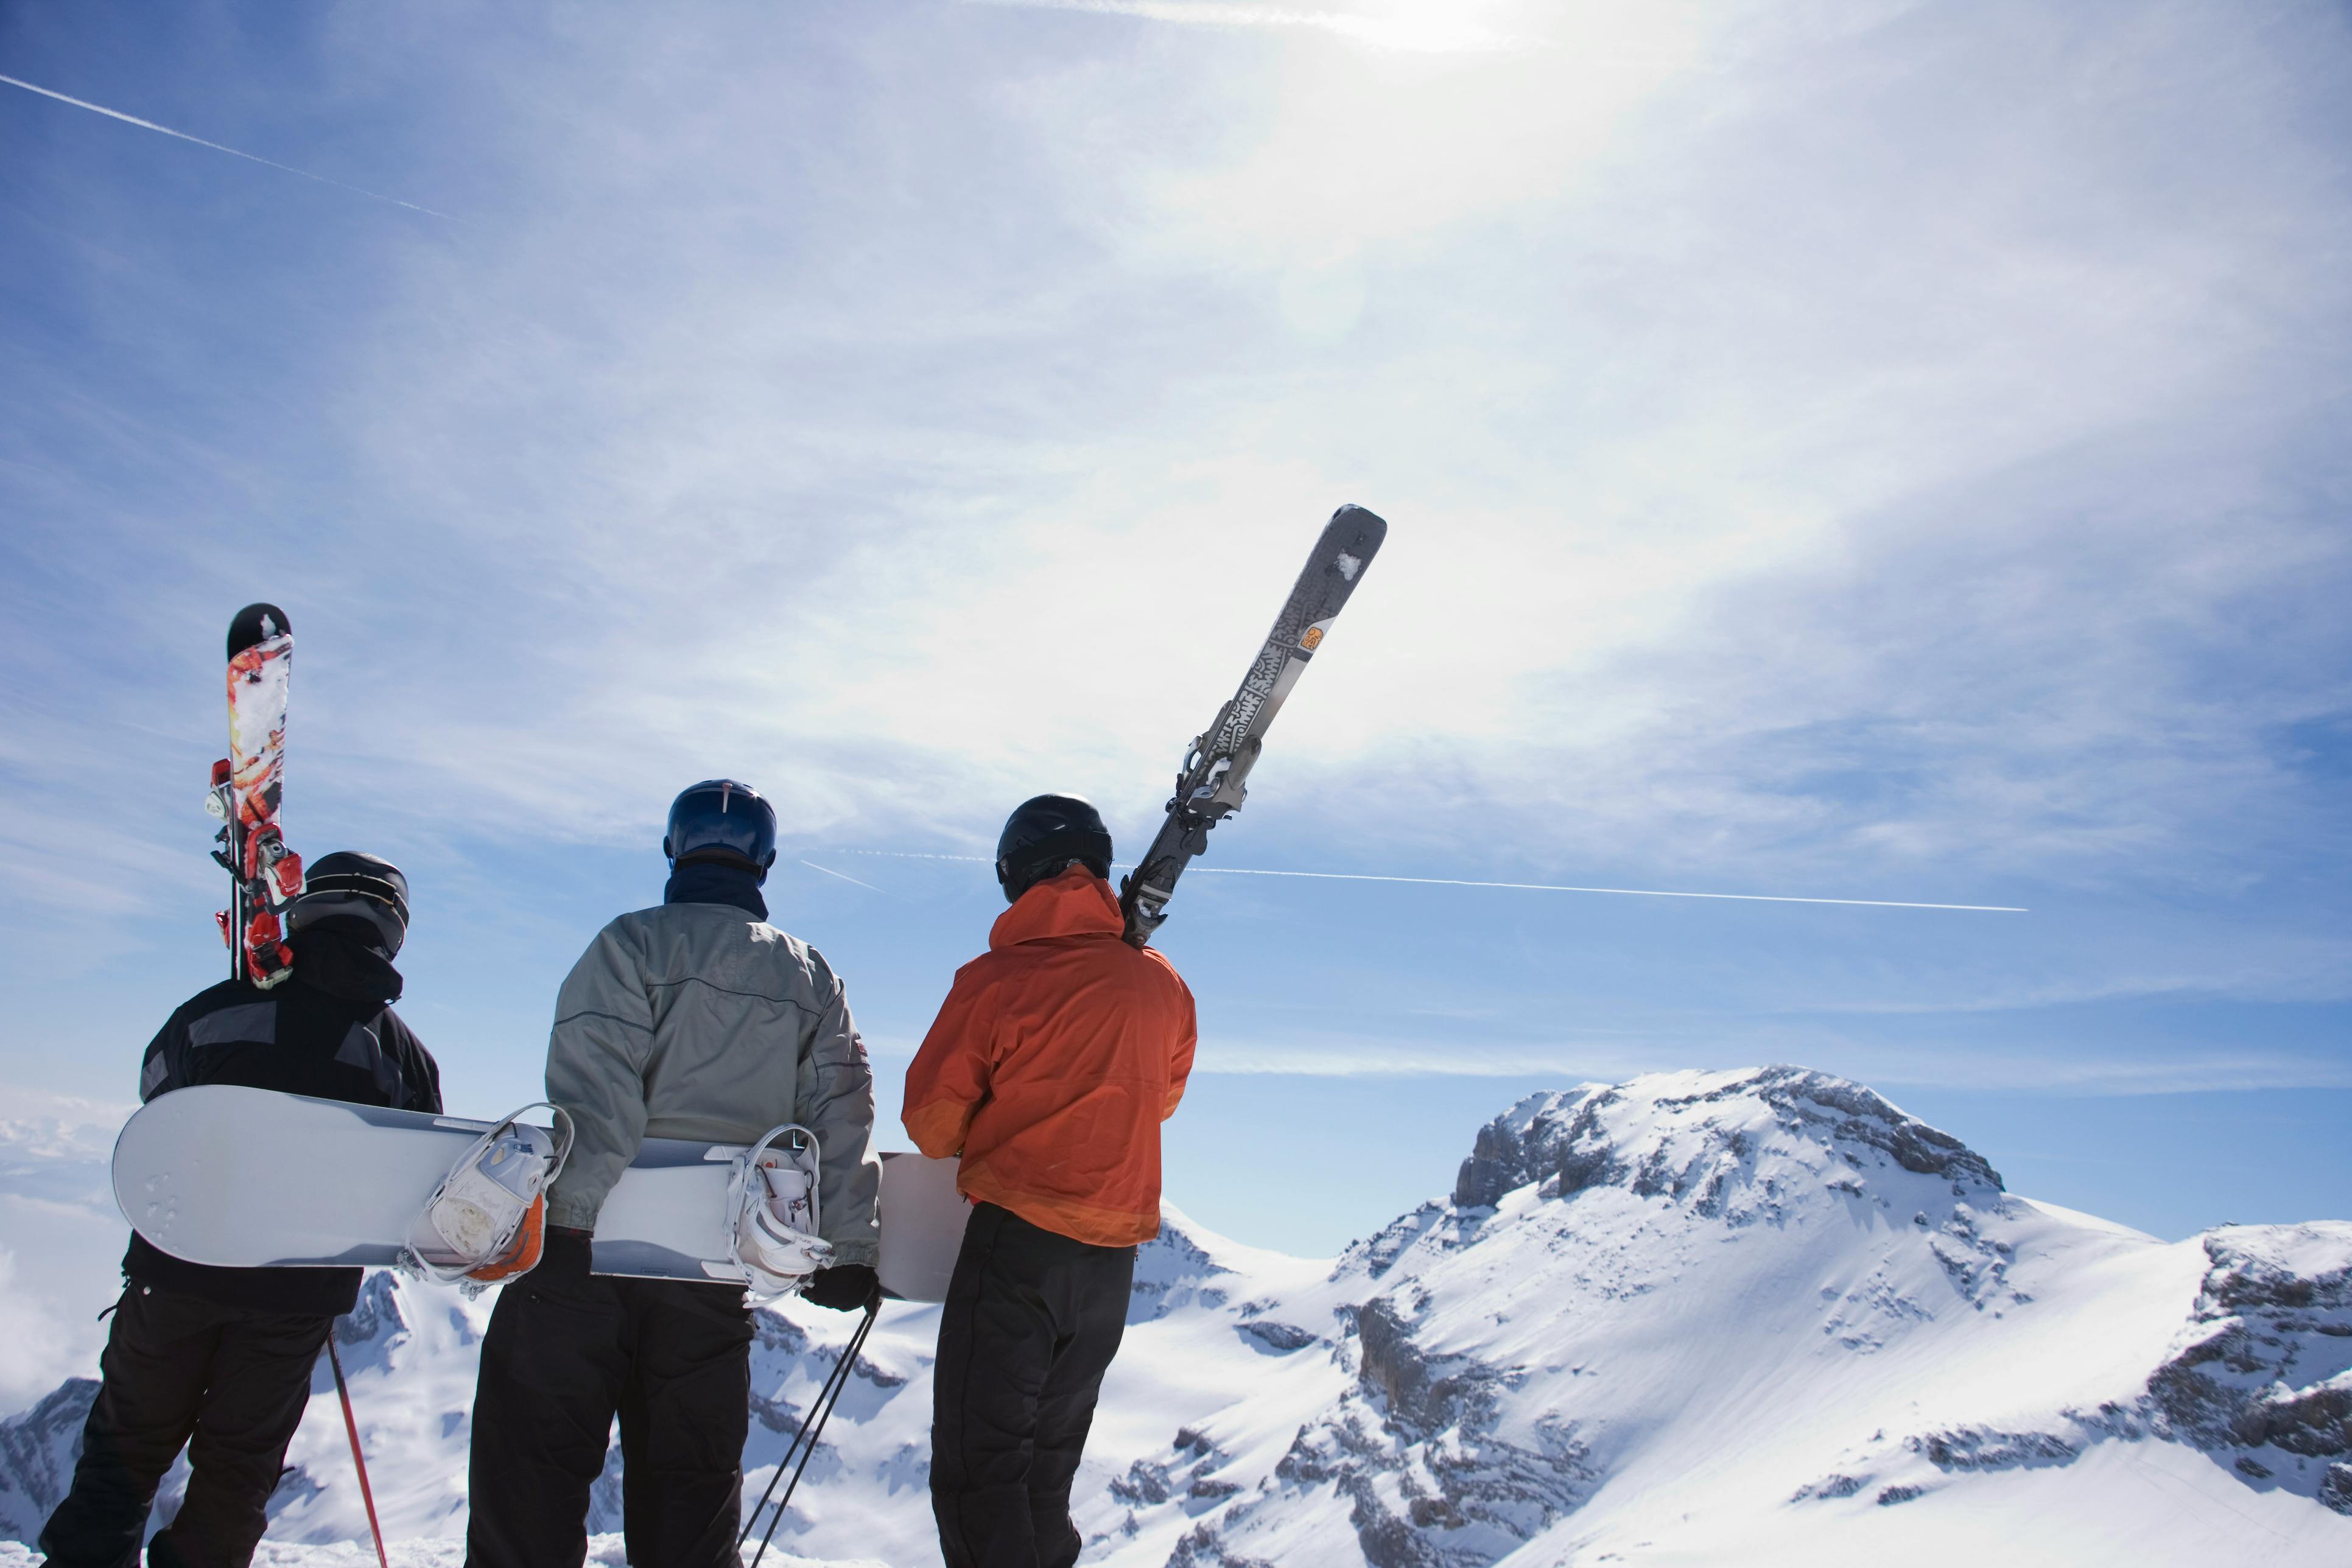 Two skiers and a snowboarder stand on the edge of a hill looking out at snowy mountains